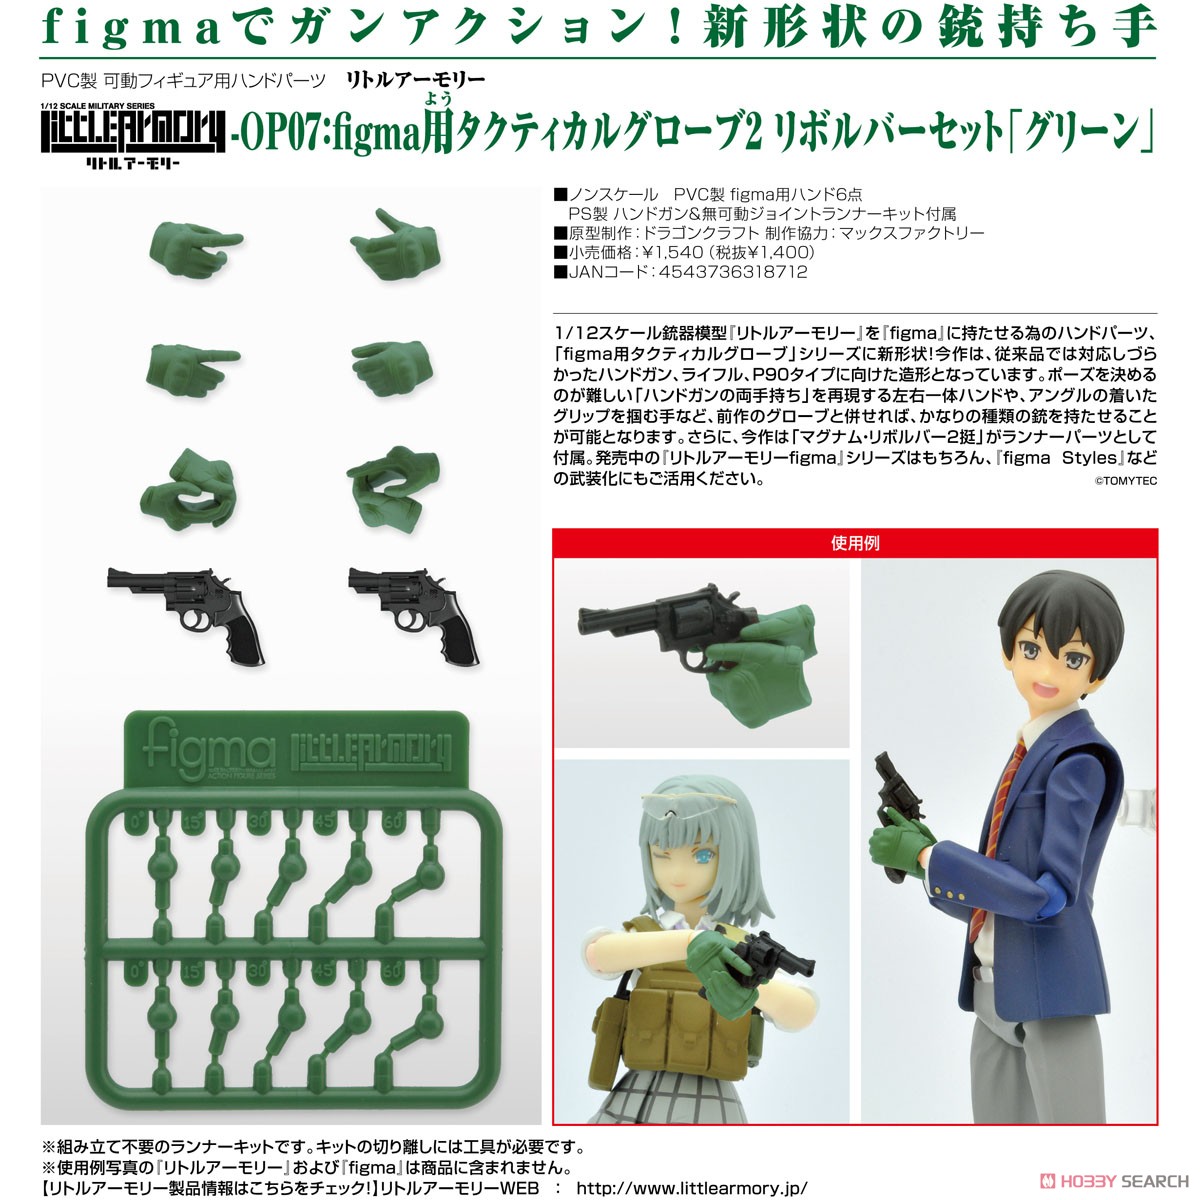 LittleArmory-OP07: figma Tactical Gloves 2 - Revolver Set (Green) (PVC Figure) Item picture3